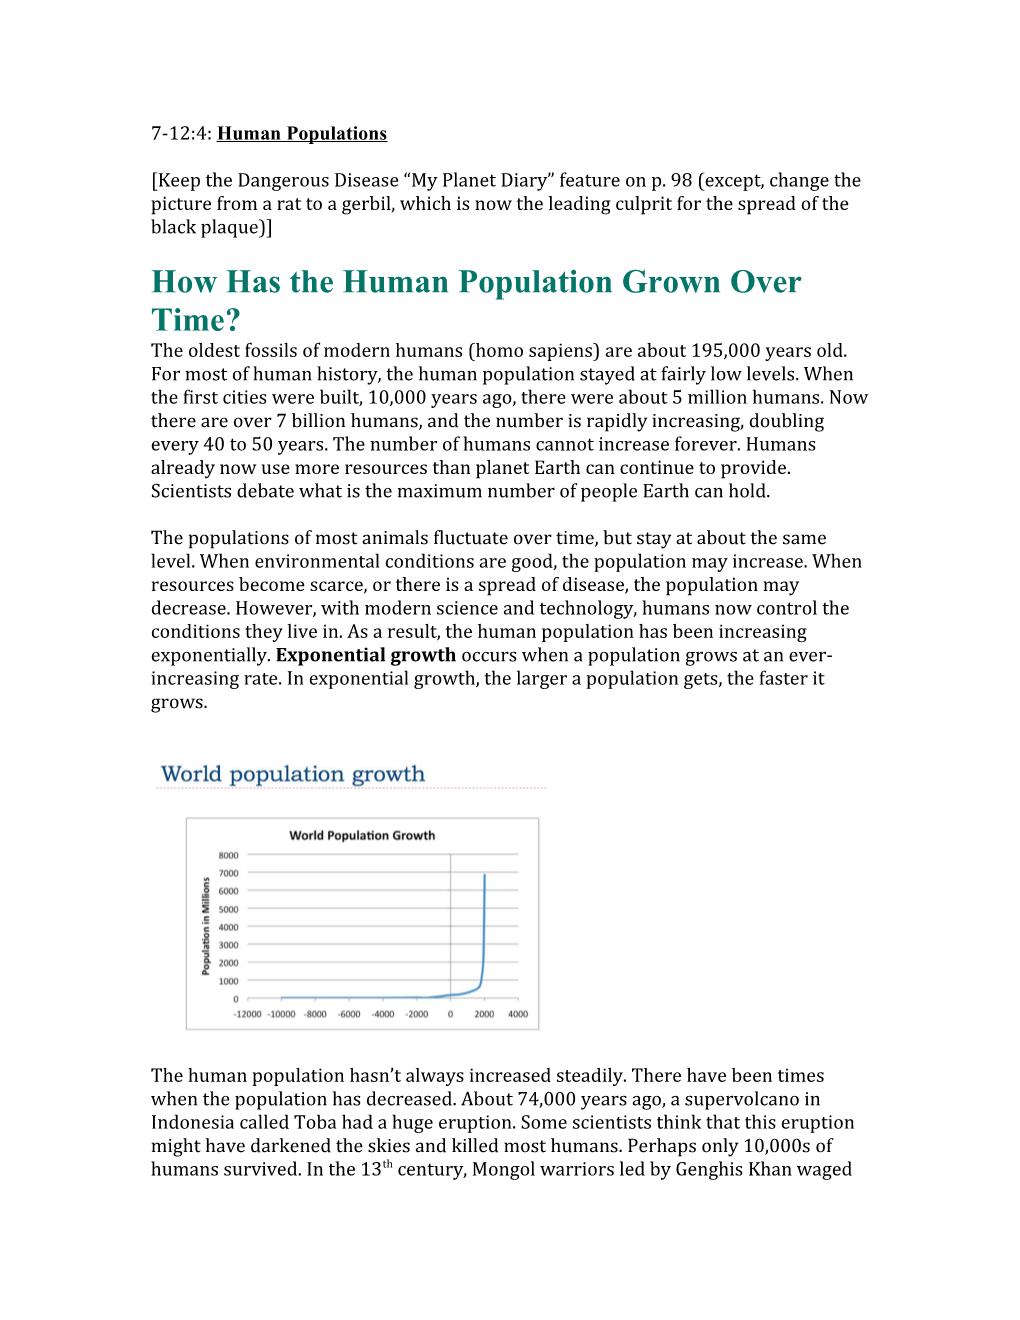 How Has the Human Population Grown Over Time?